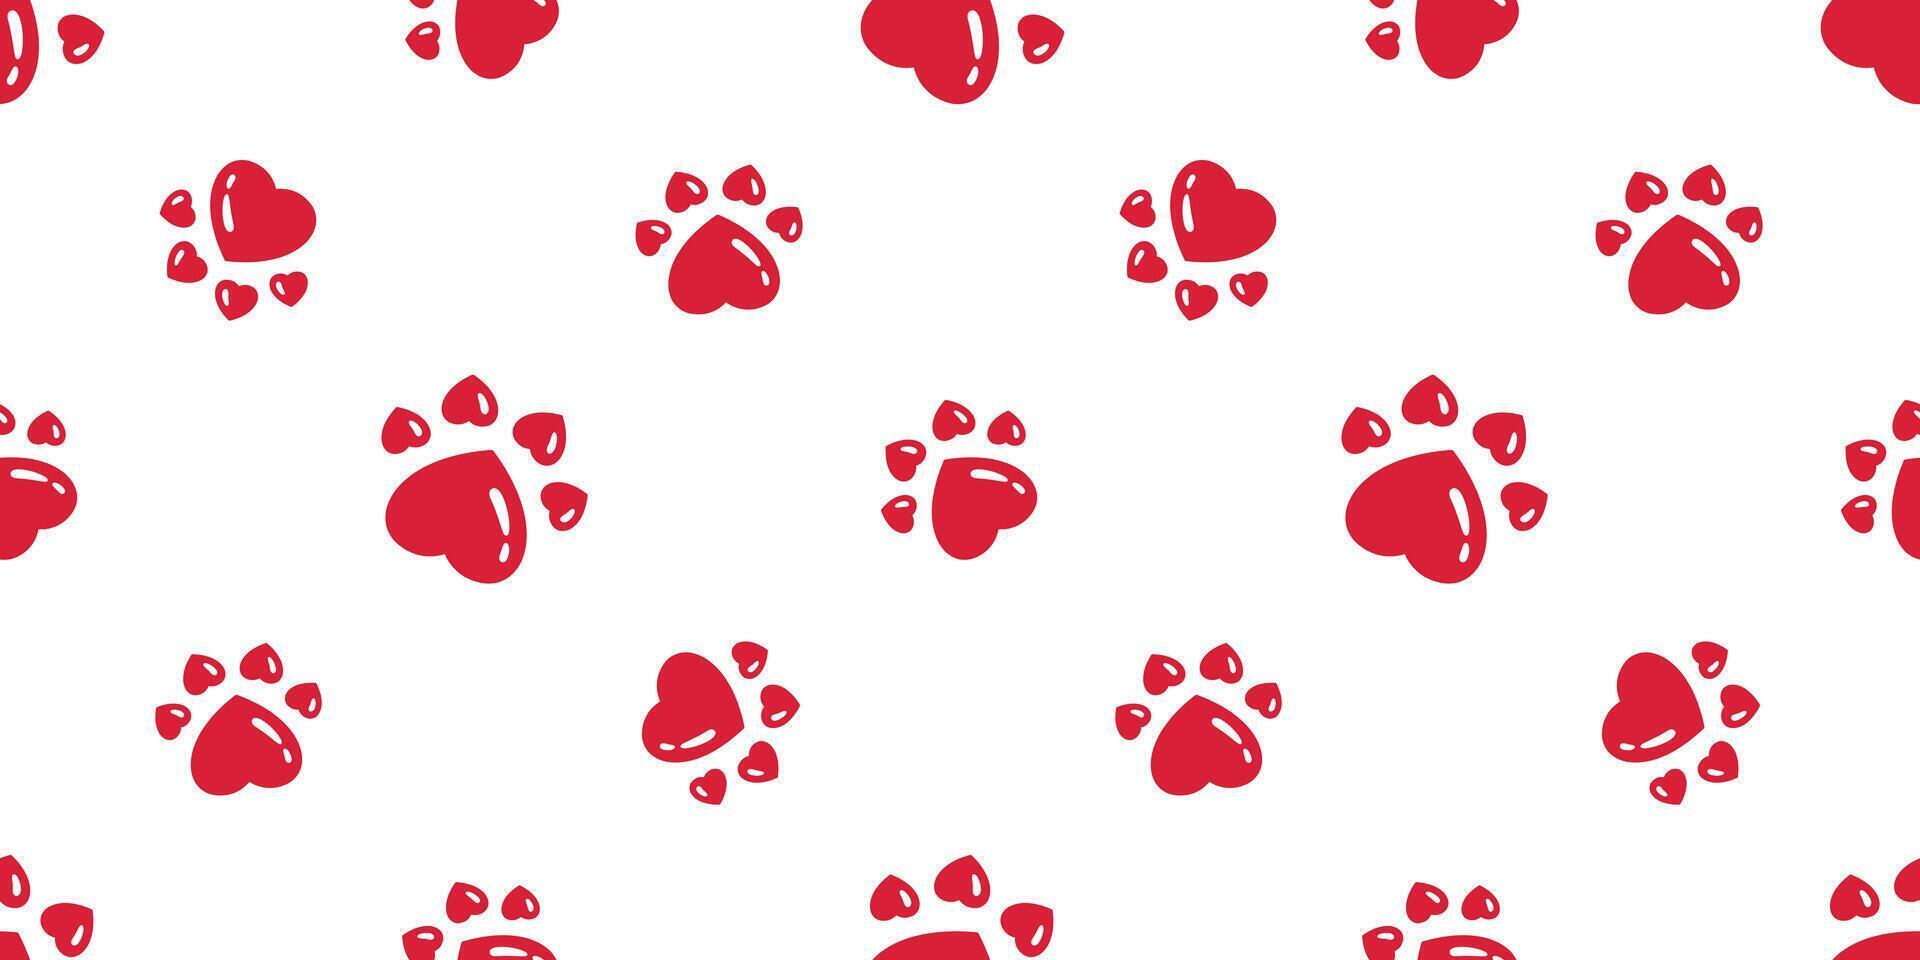 dog paw seamless pattern heart footprint valentine cat bear french bulldog cartoon scarf repeat wallpaper tile background doodle illustration red design vector